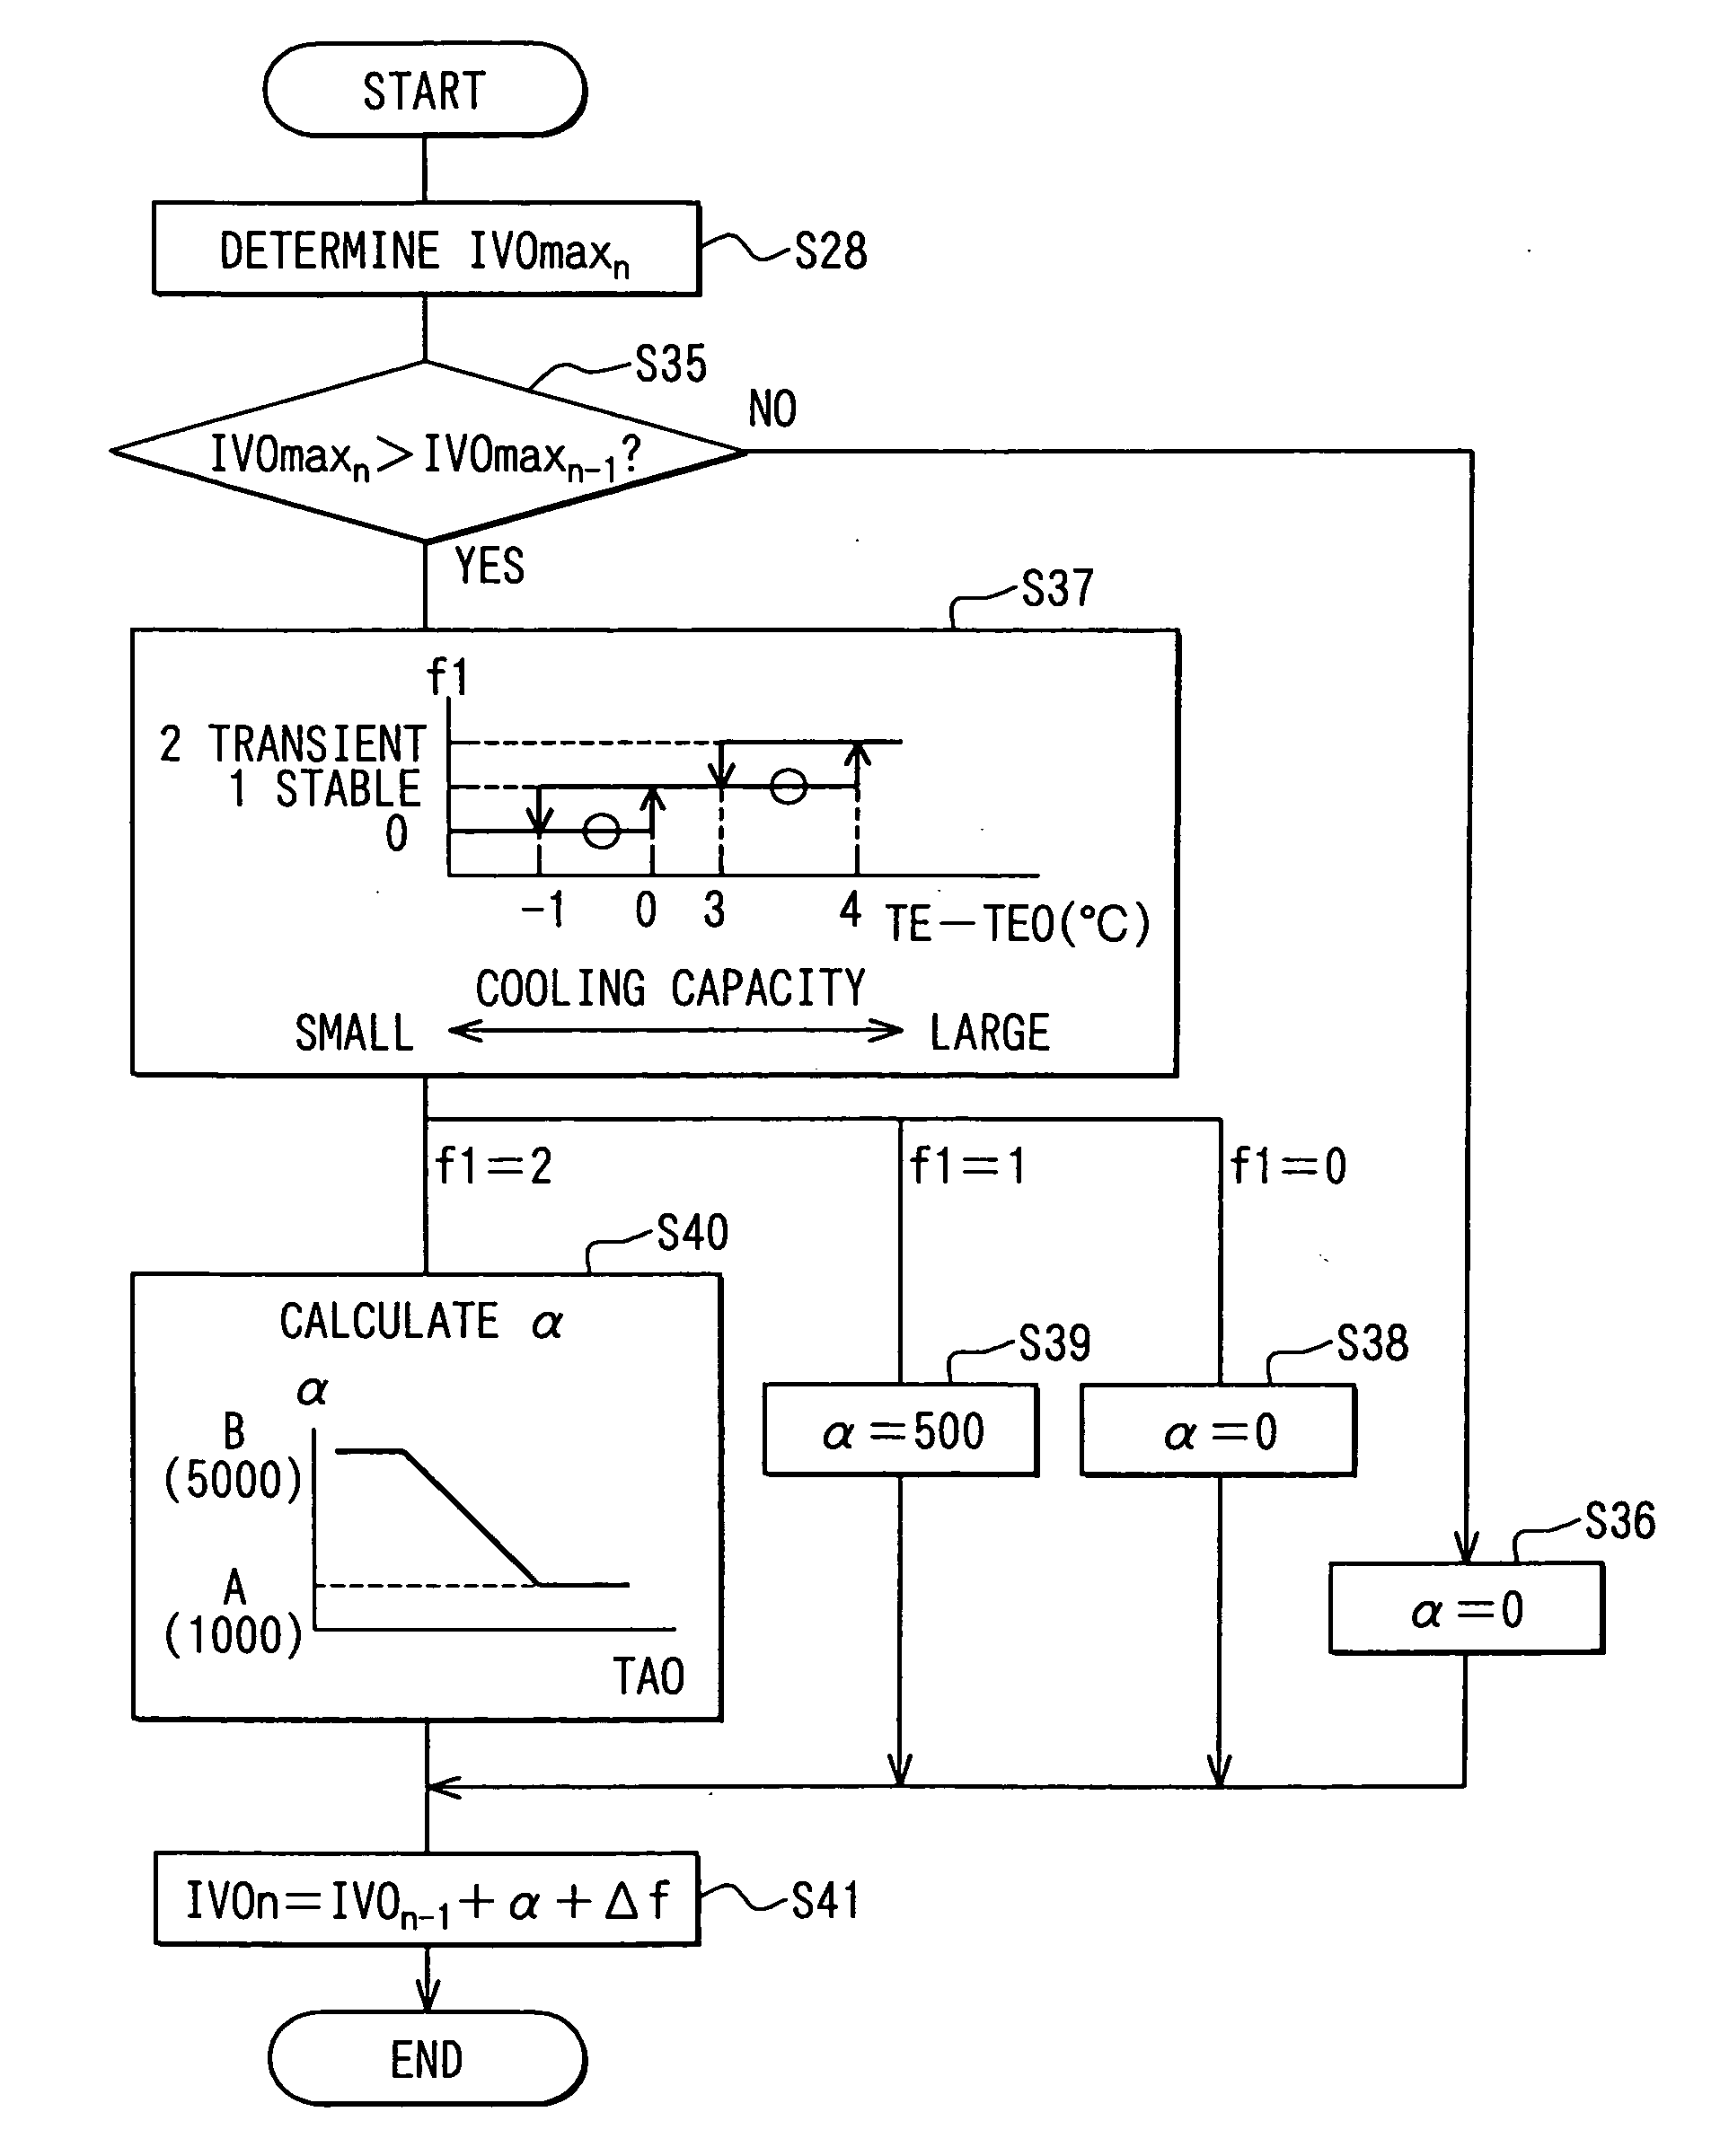 Air conditioner with control of compressor